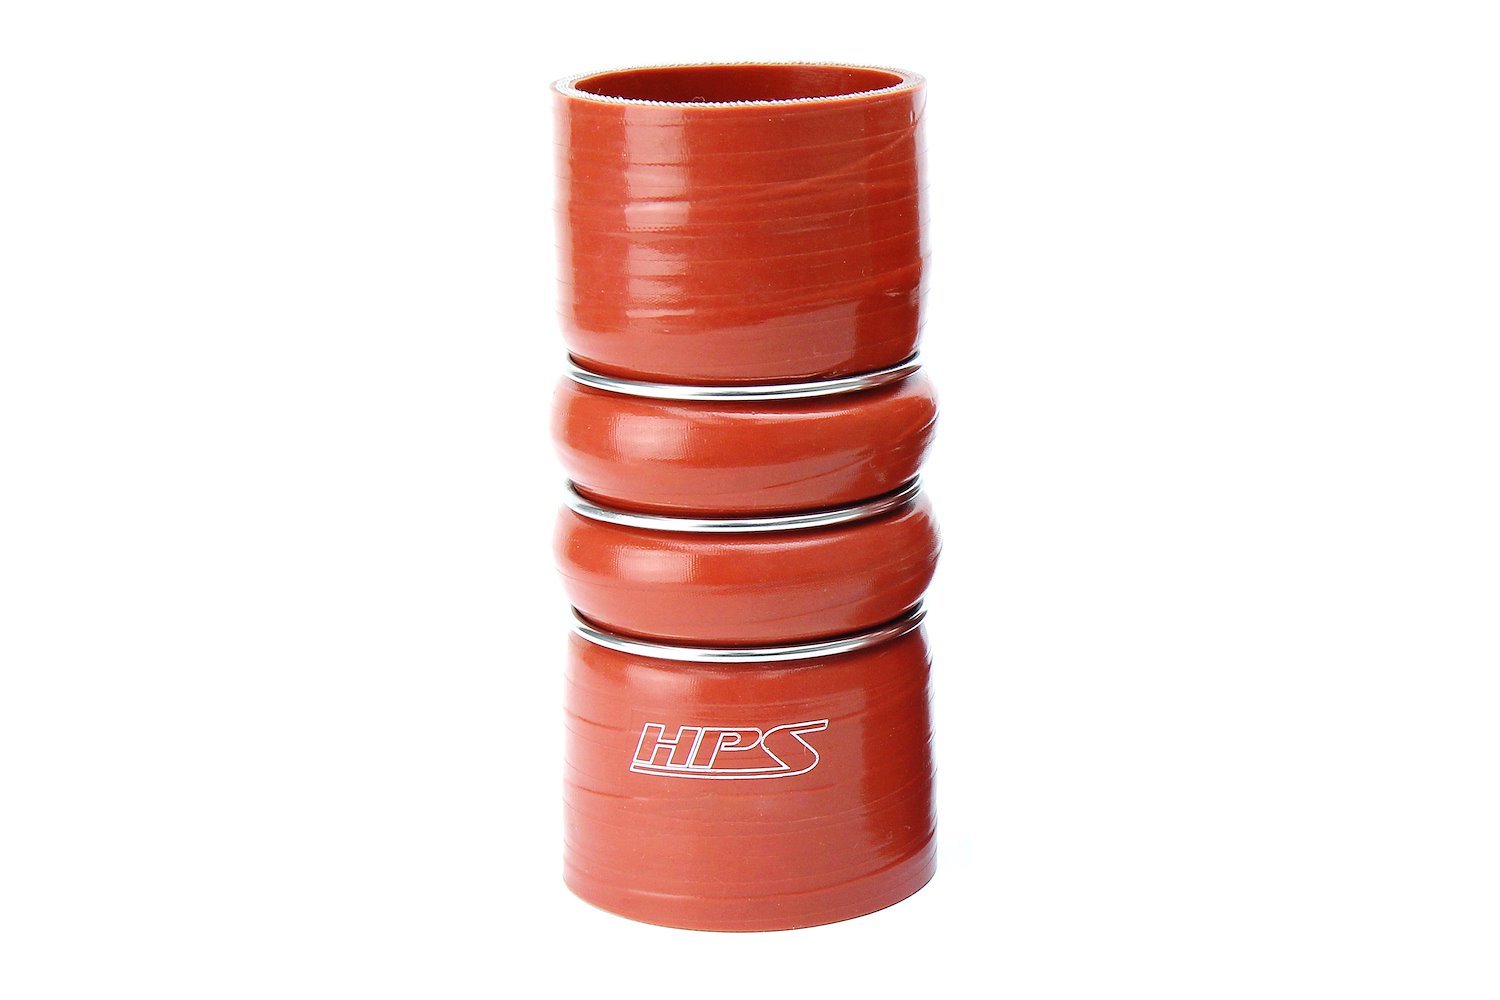 CAC-450-HOT Silicone CAC Hose, Silicone CAC Hump Hose Hot, High-Temp 4-Ply Aramid Reinforced, 4-1/2 in. ID, 6 in. Long